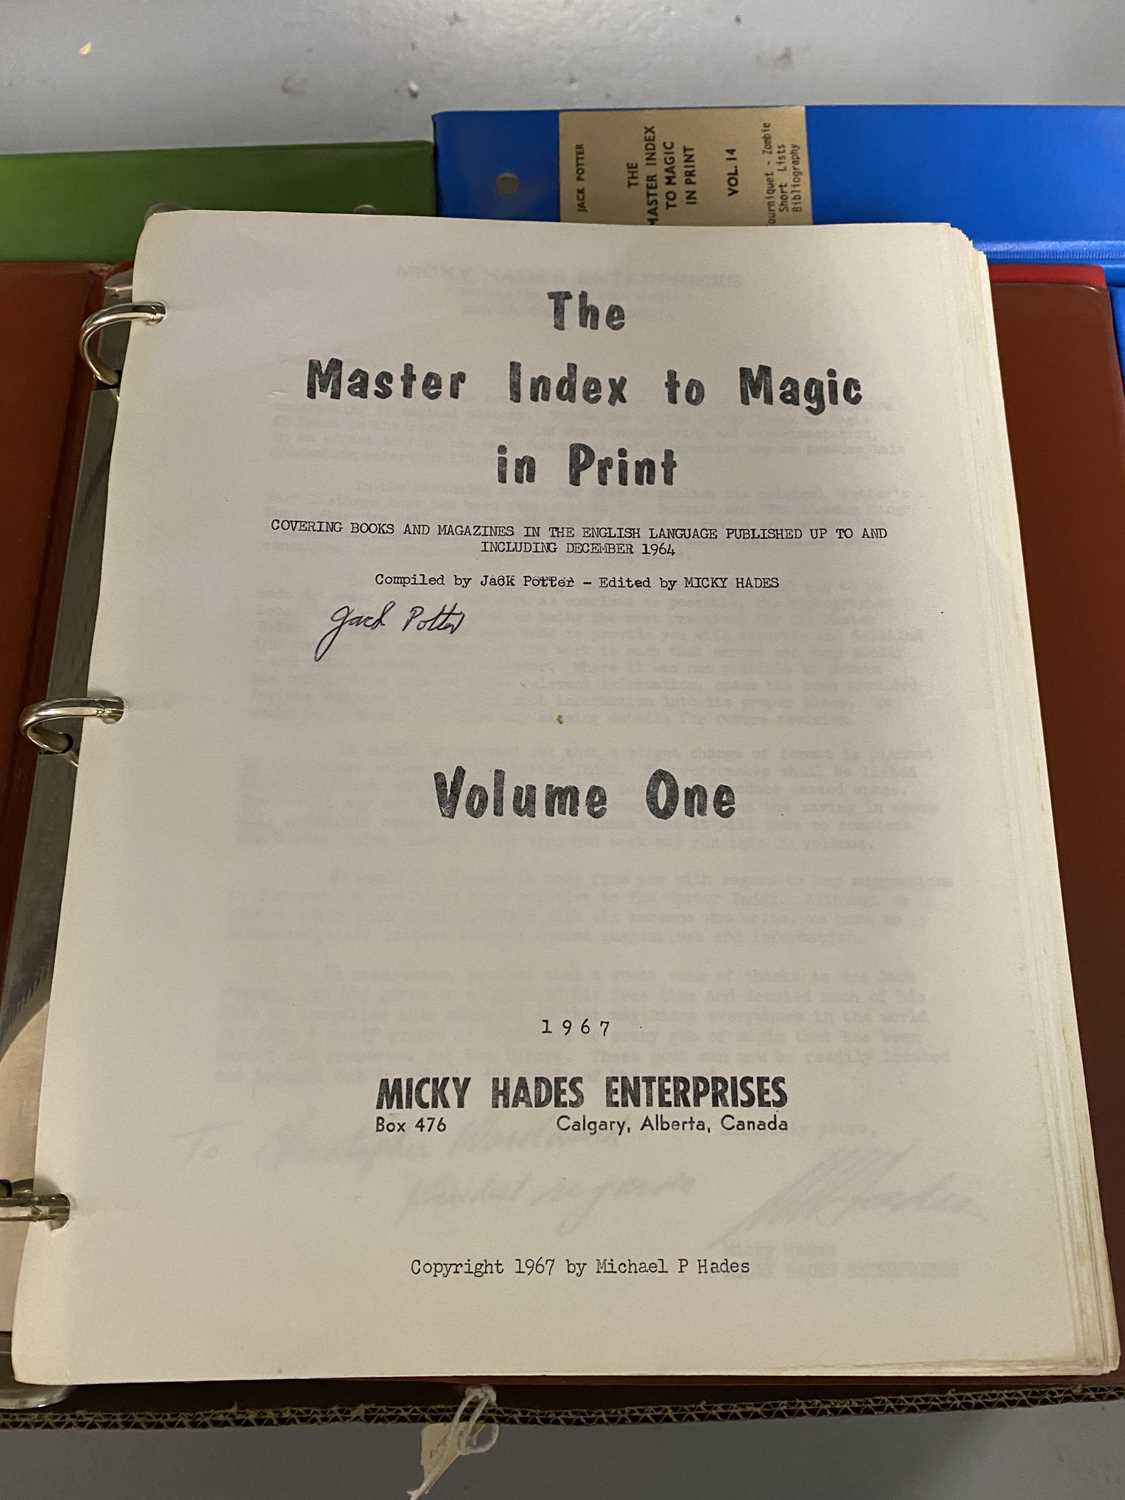 Potter's The Master Index to Magic in Print, and other ephemera relating to magic - Image 10 of 13